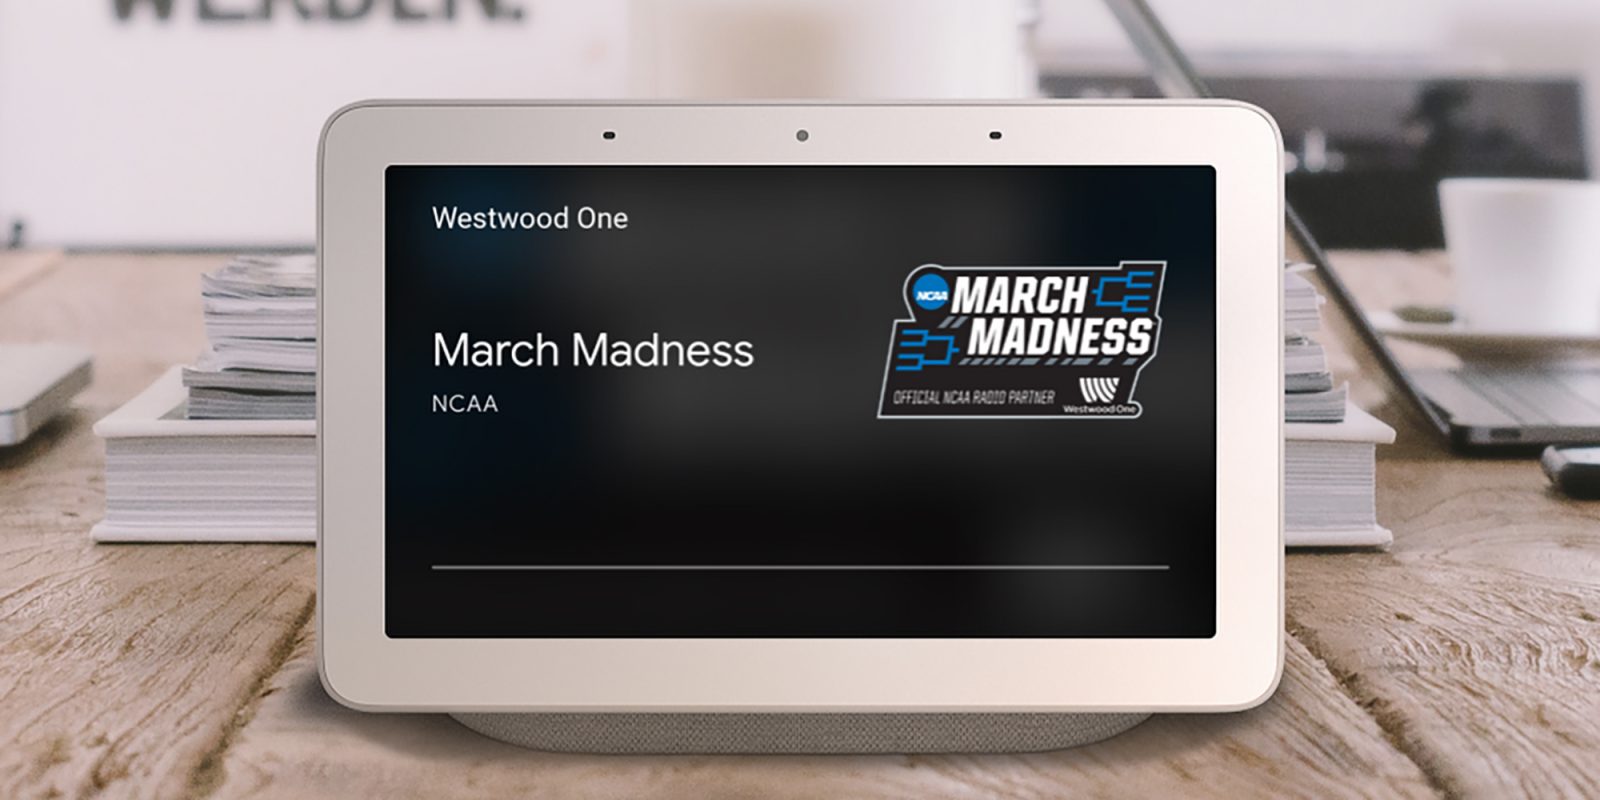 You can now listen to all March Madness games for free with the Google